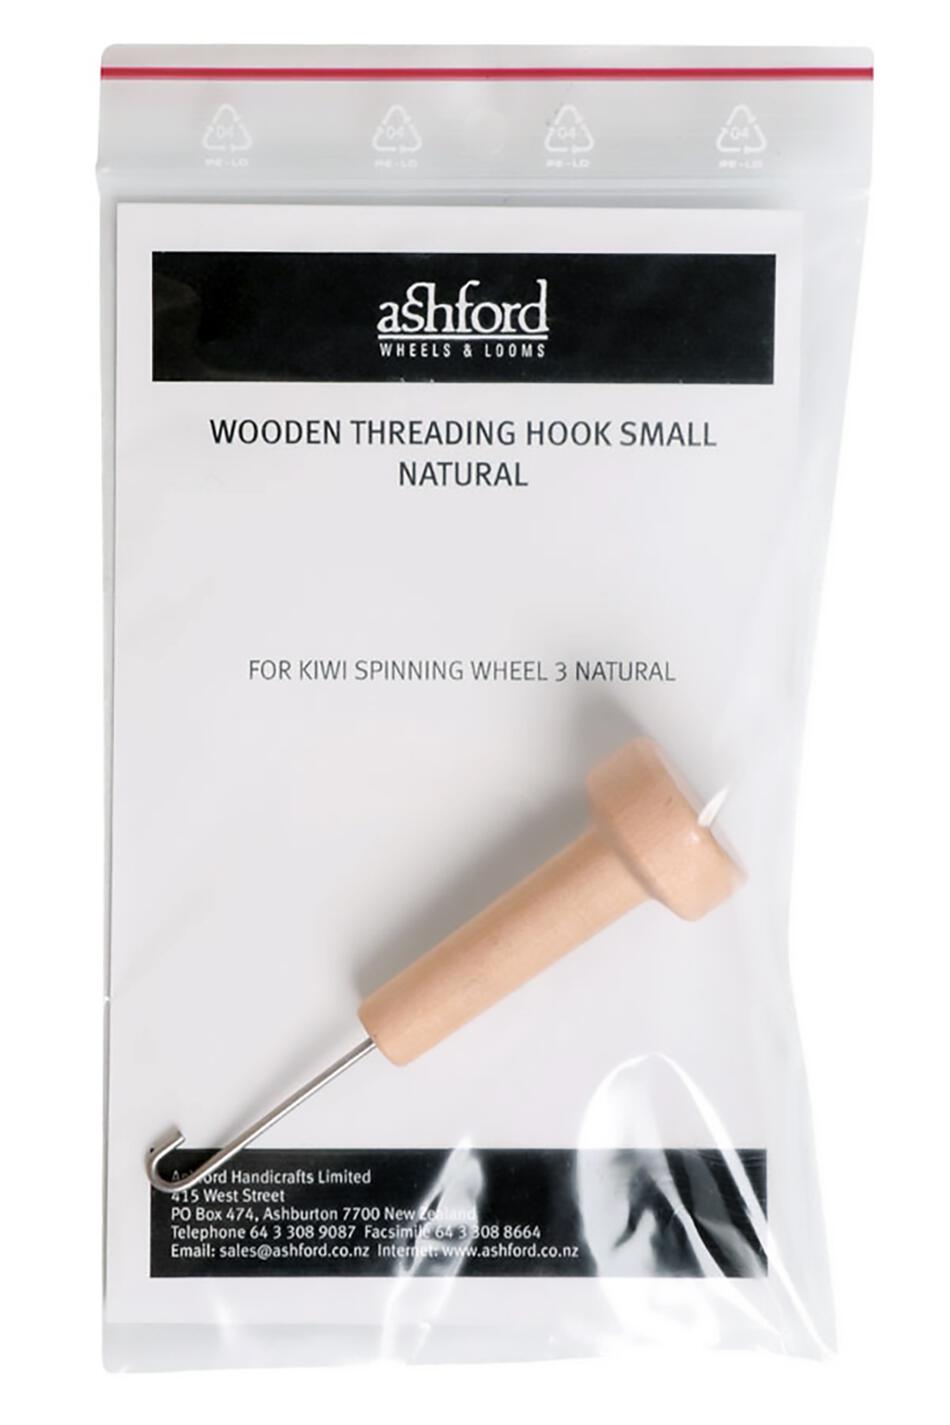 Spinning Equipment Ashford Wooden Threading Hook Small Natural  For KSW3  Packaged 1pc